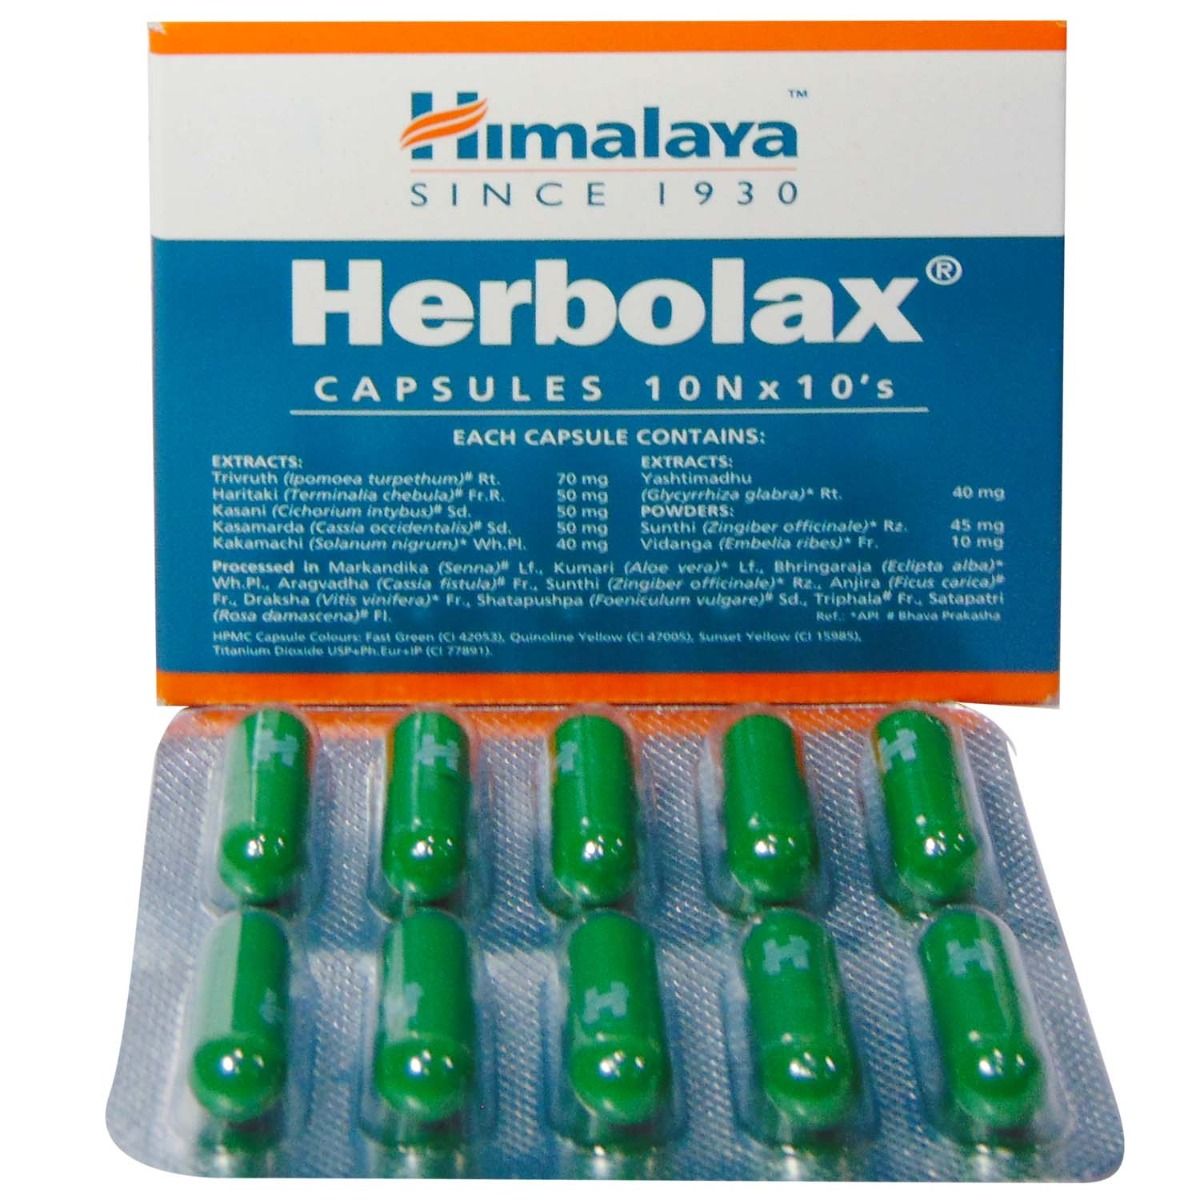 HERBOLAX TABLET 10'S, Pack of 10 S